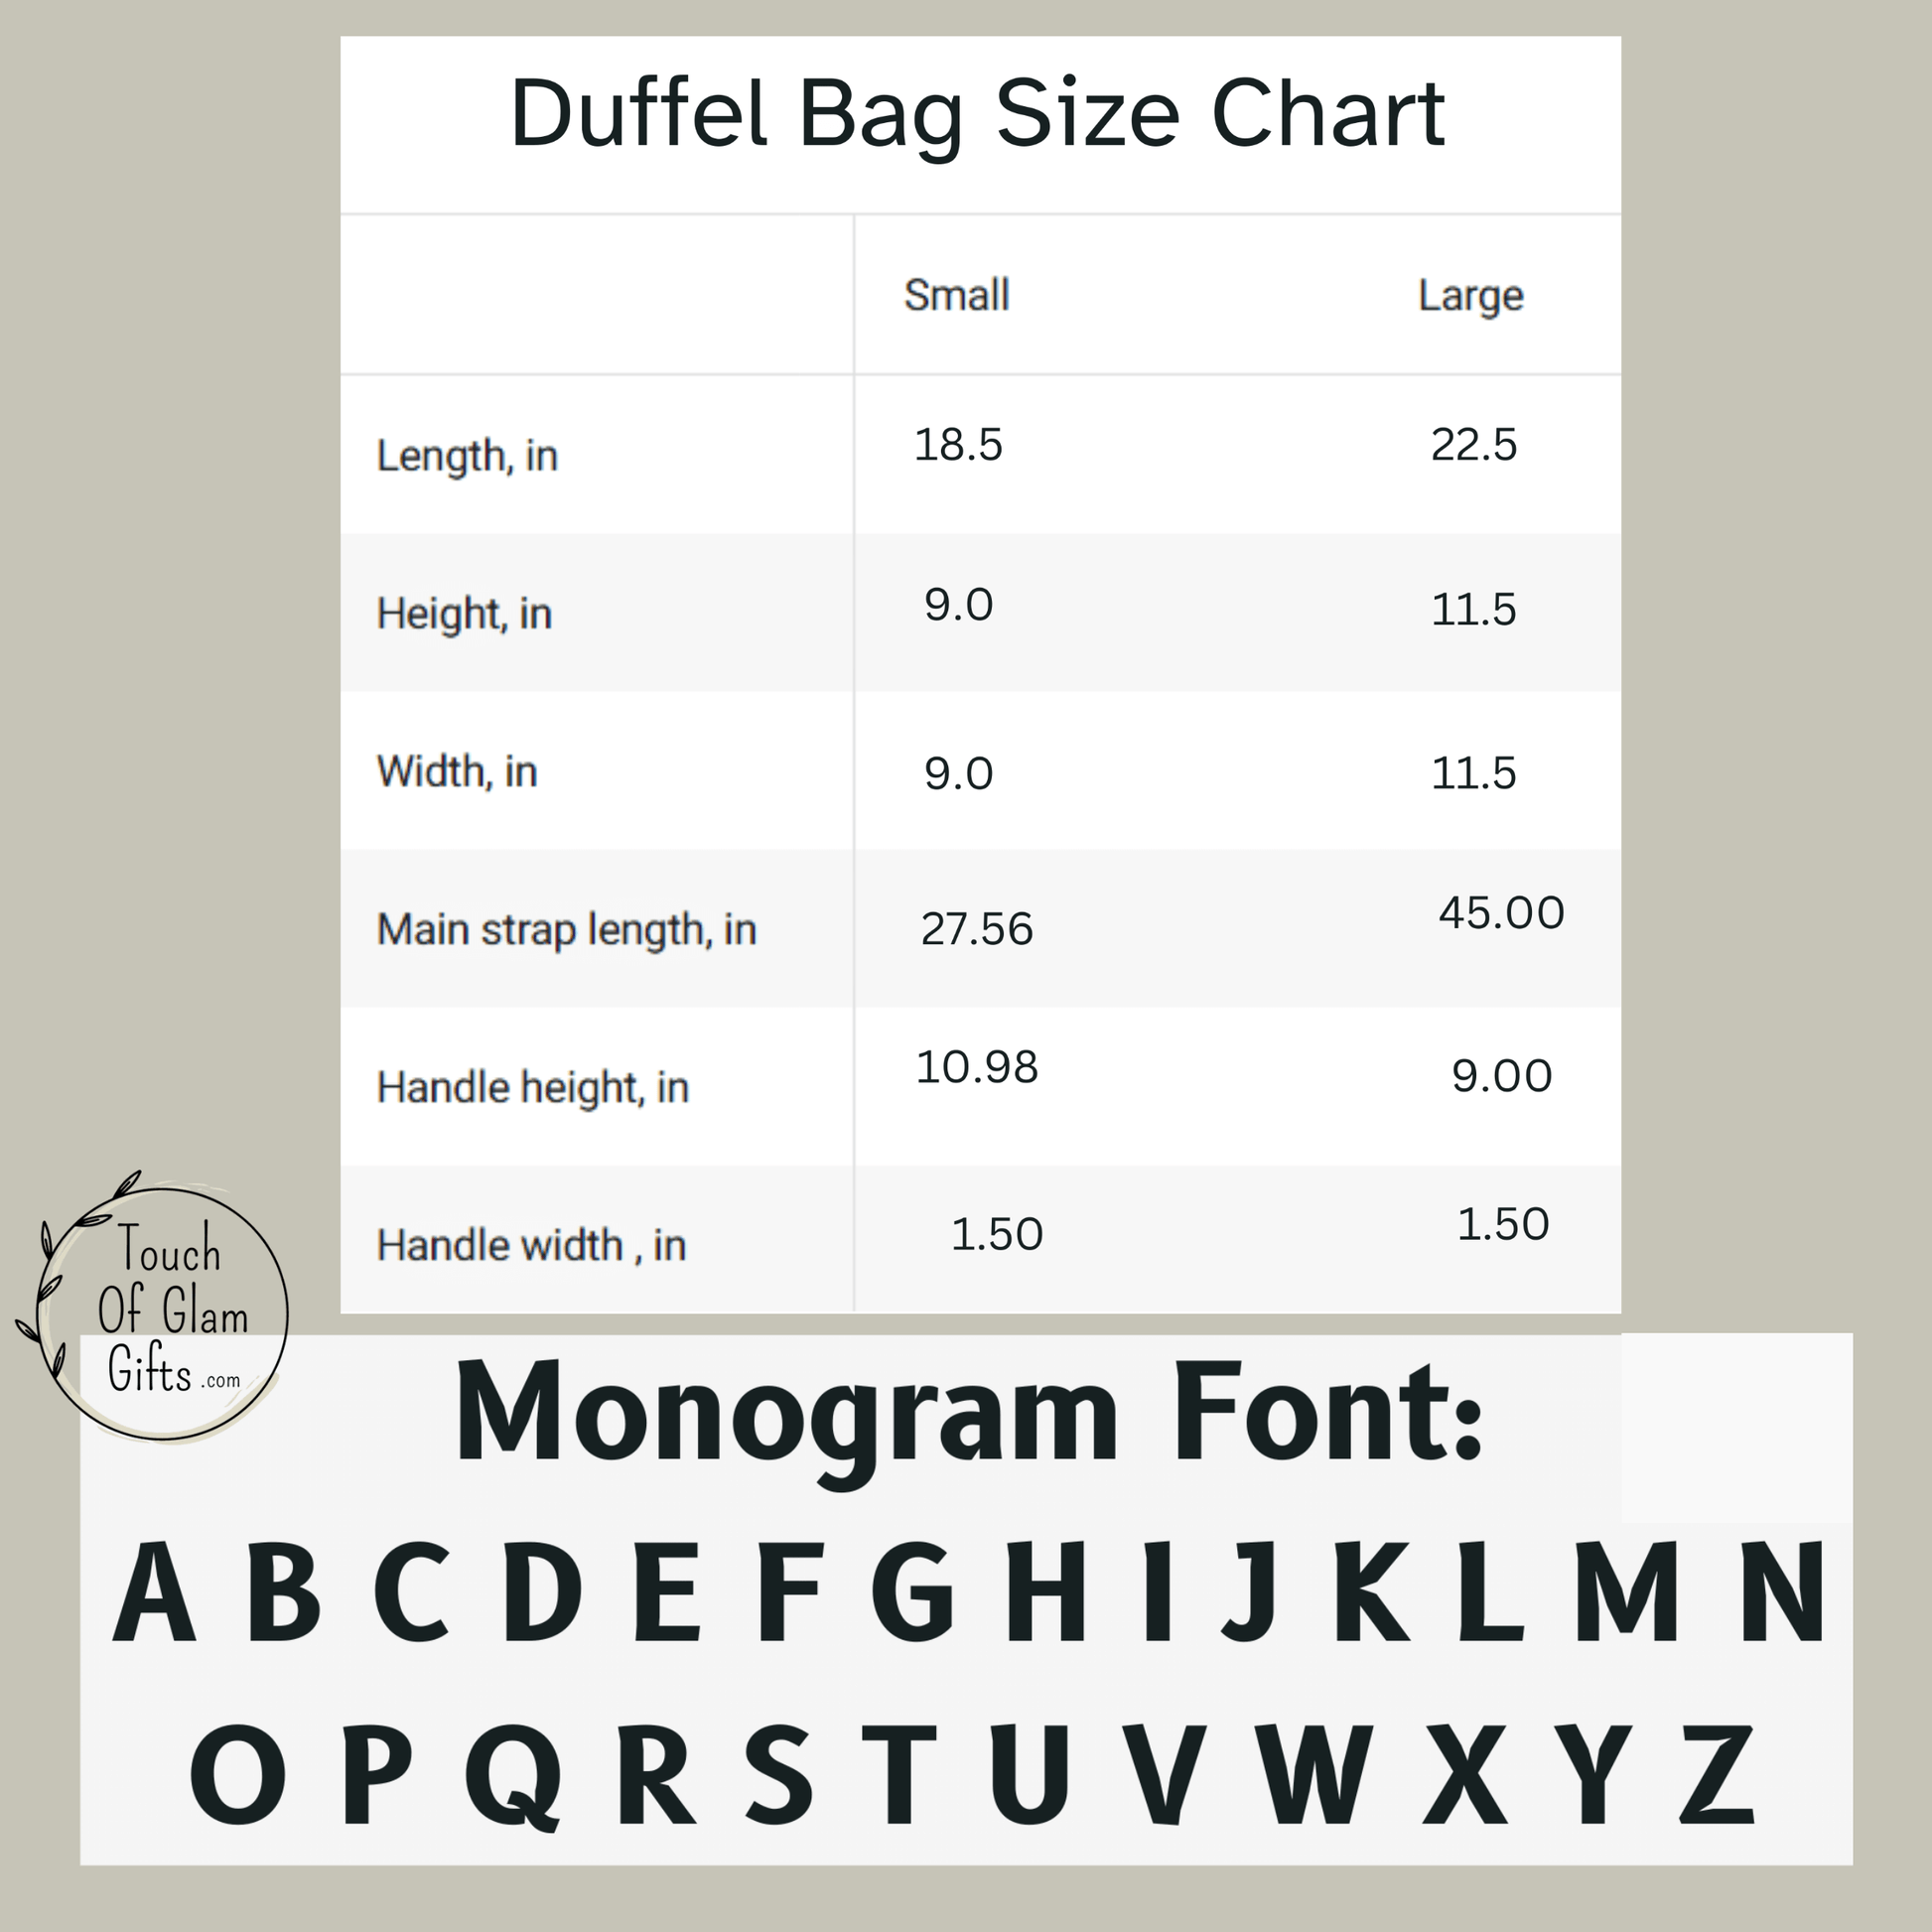 The size chart for both the large and small duffel bag for men. The monogram font used shows the alphabet so you can see what your initials will look like on your bag.